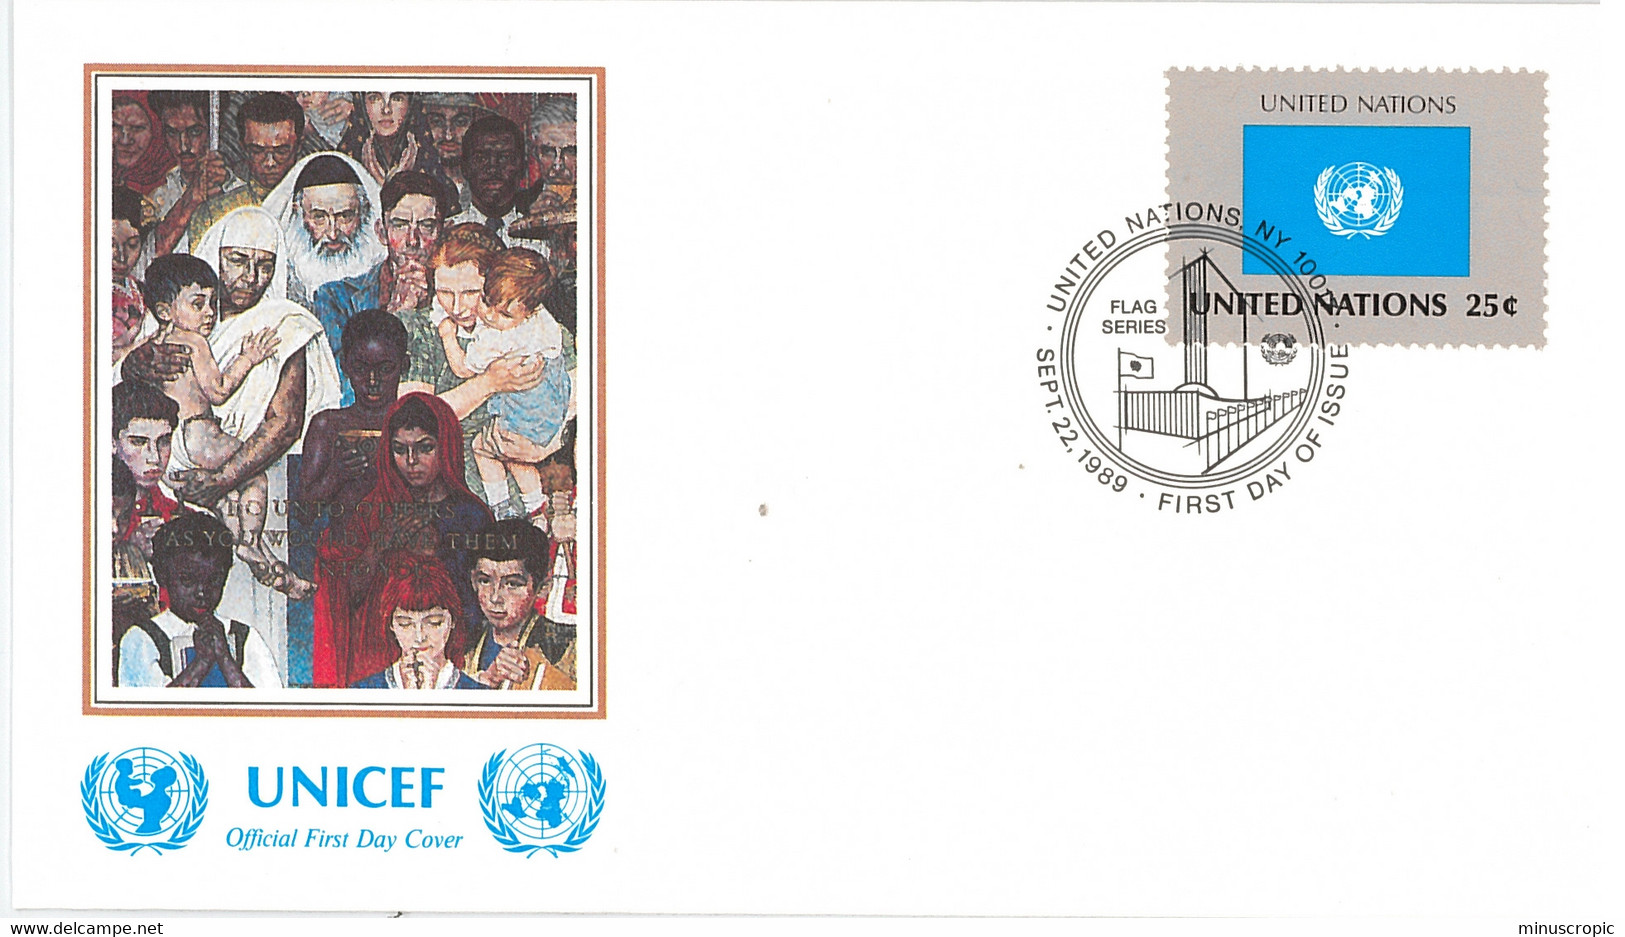 Enveloppe FDC United Nations - UNICEF - Flag Series 16/89 - United Nations - 1989 - Covers & Documents